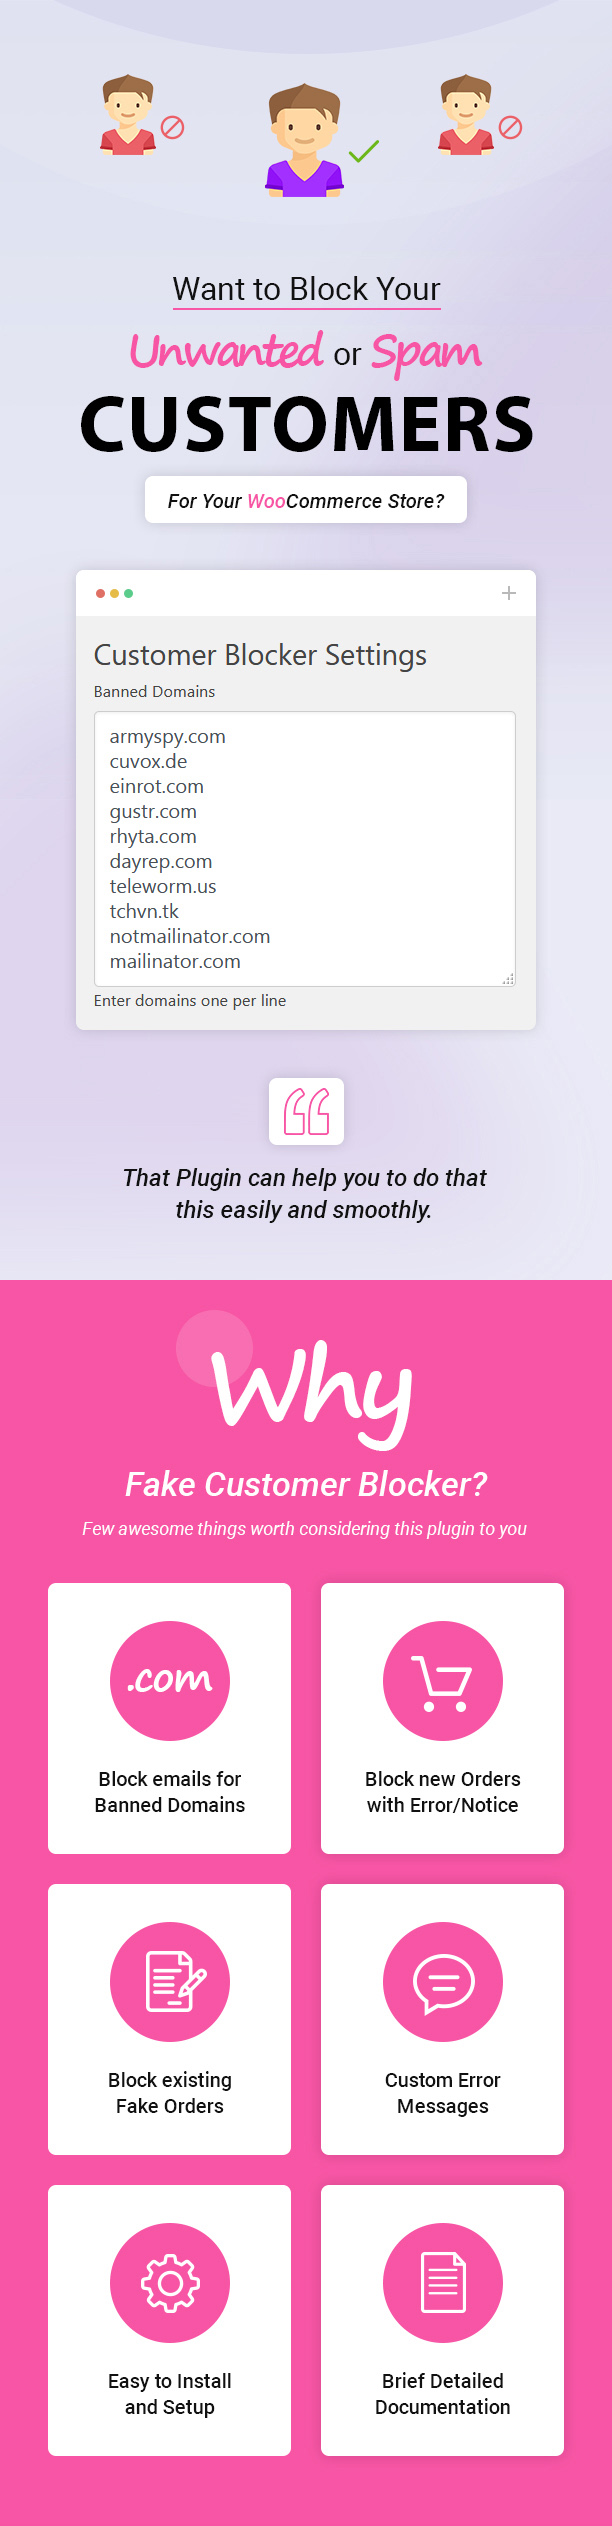 Features - Fake Customer Blocker for WooCommerce